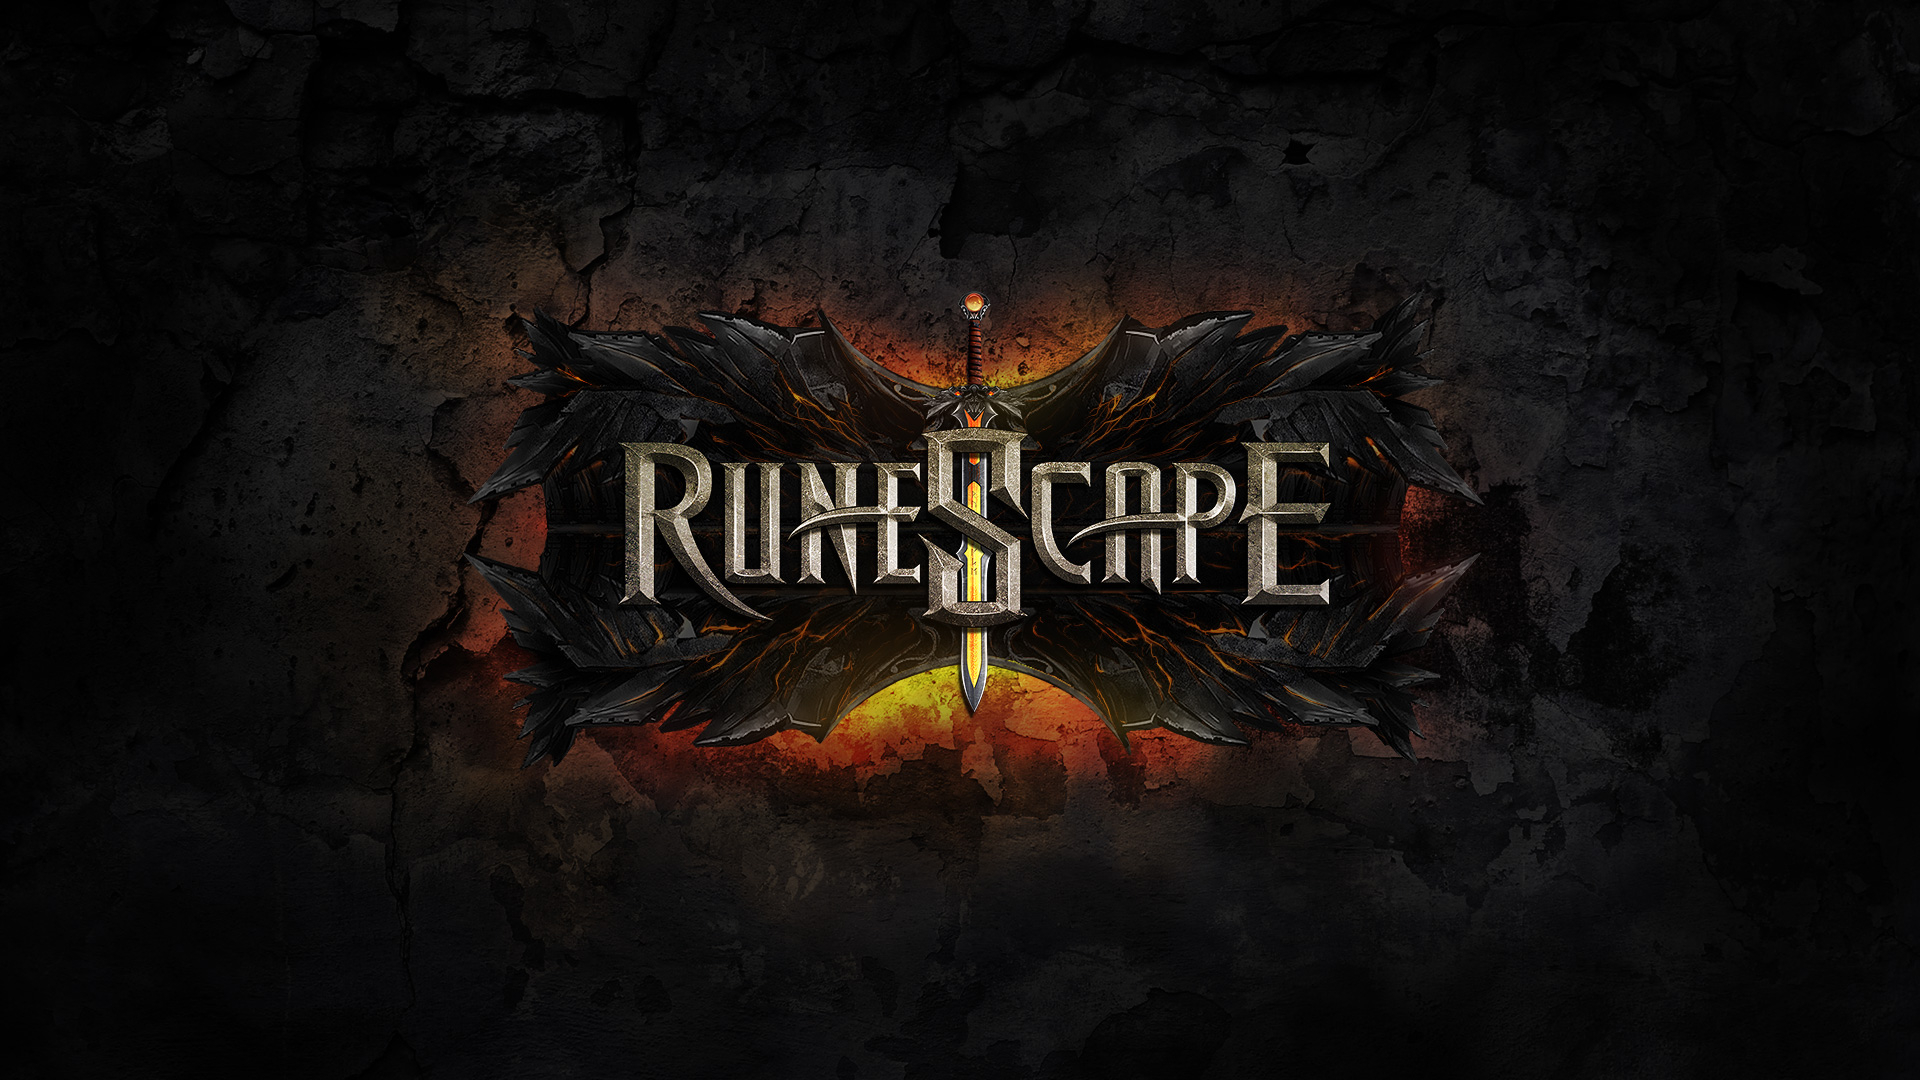 1920x1080 Looking for high quality RuneScape wallpapers. : r/runescape